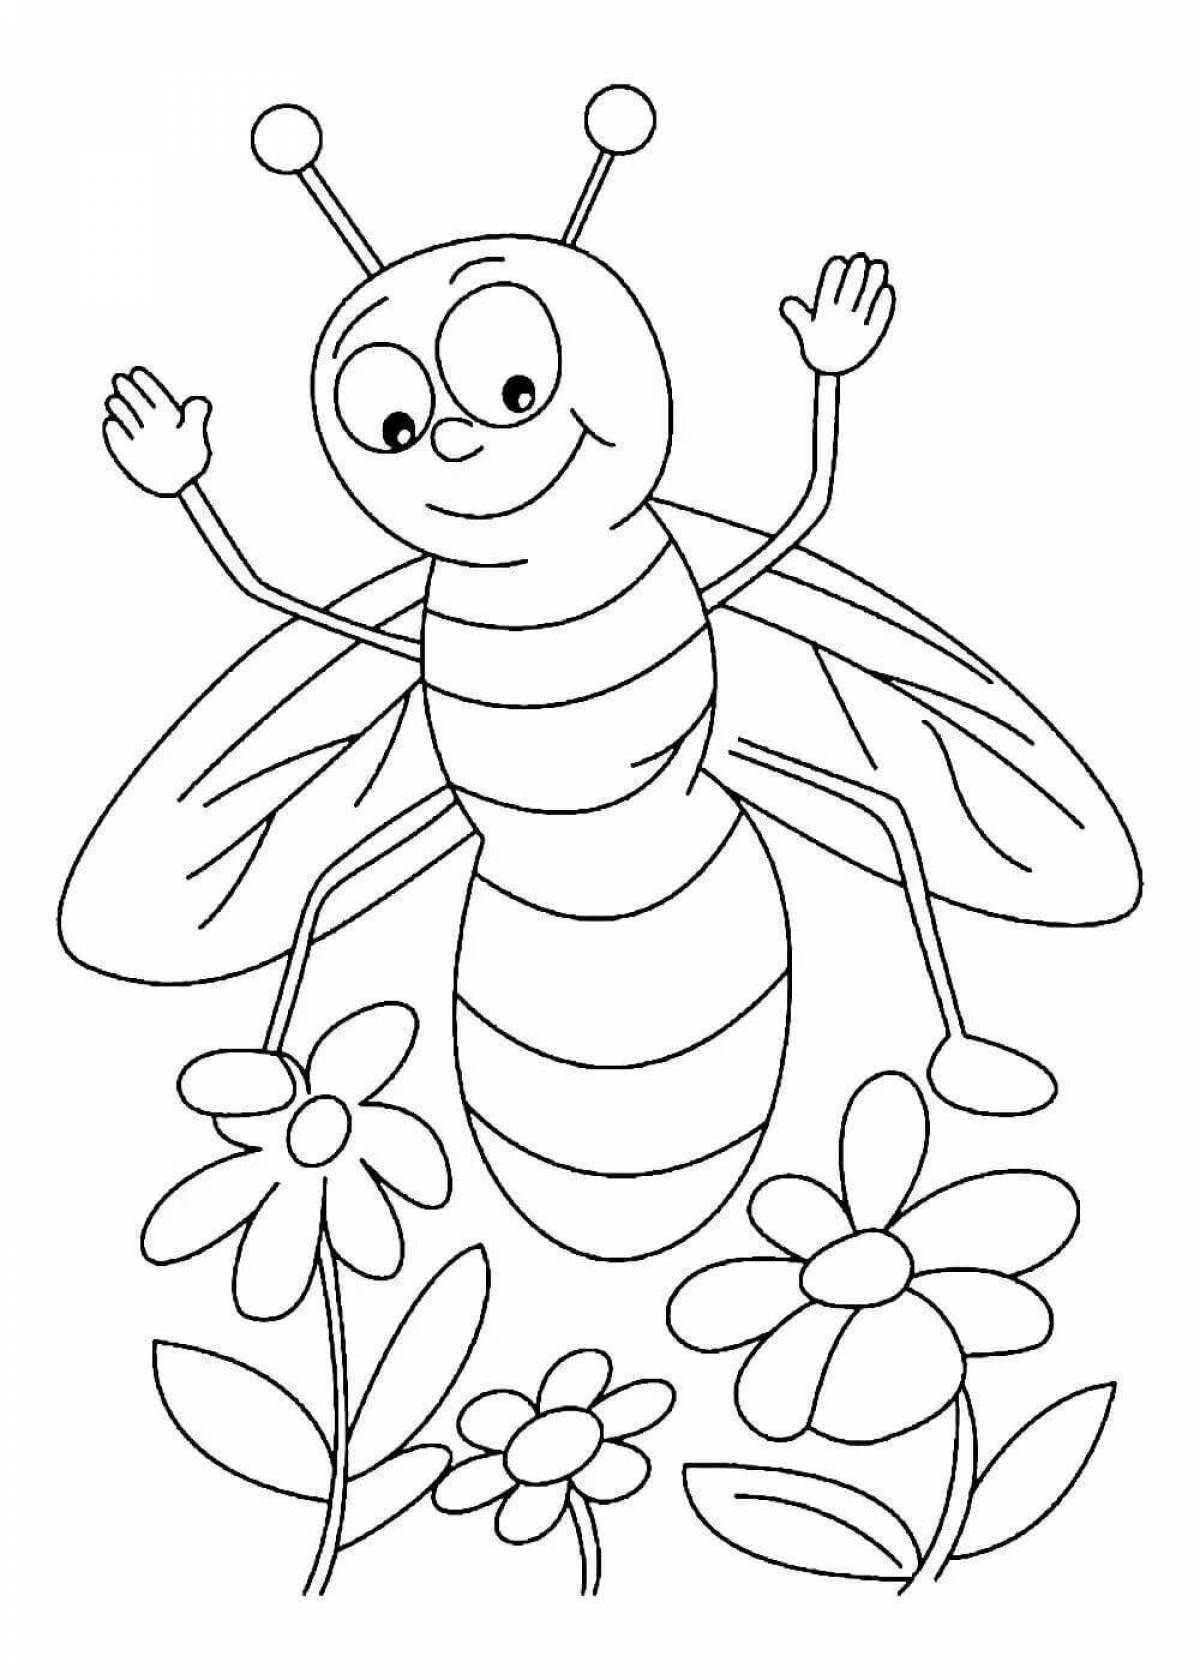 Adorable bee coloring book for 6-7 year olds